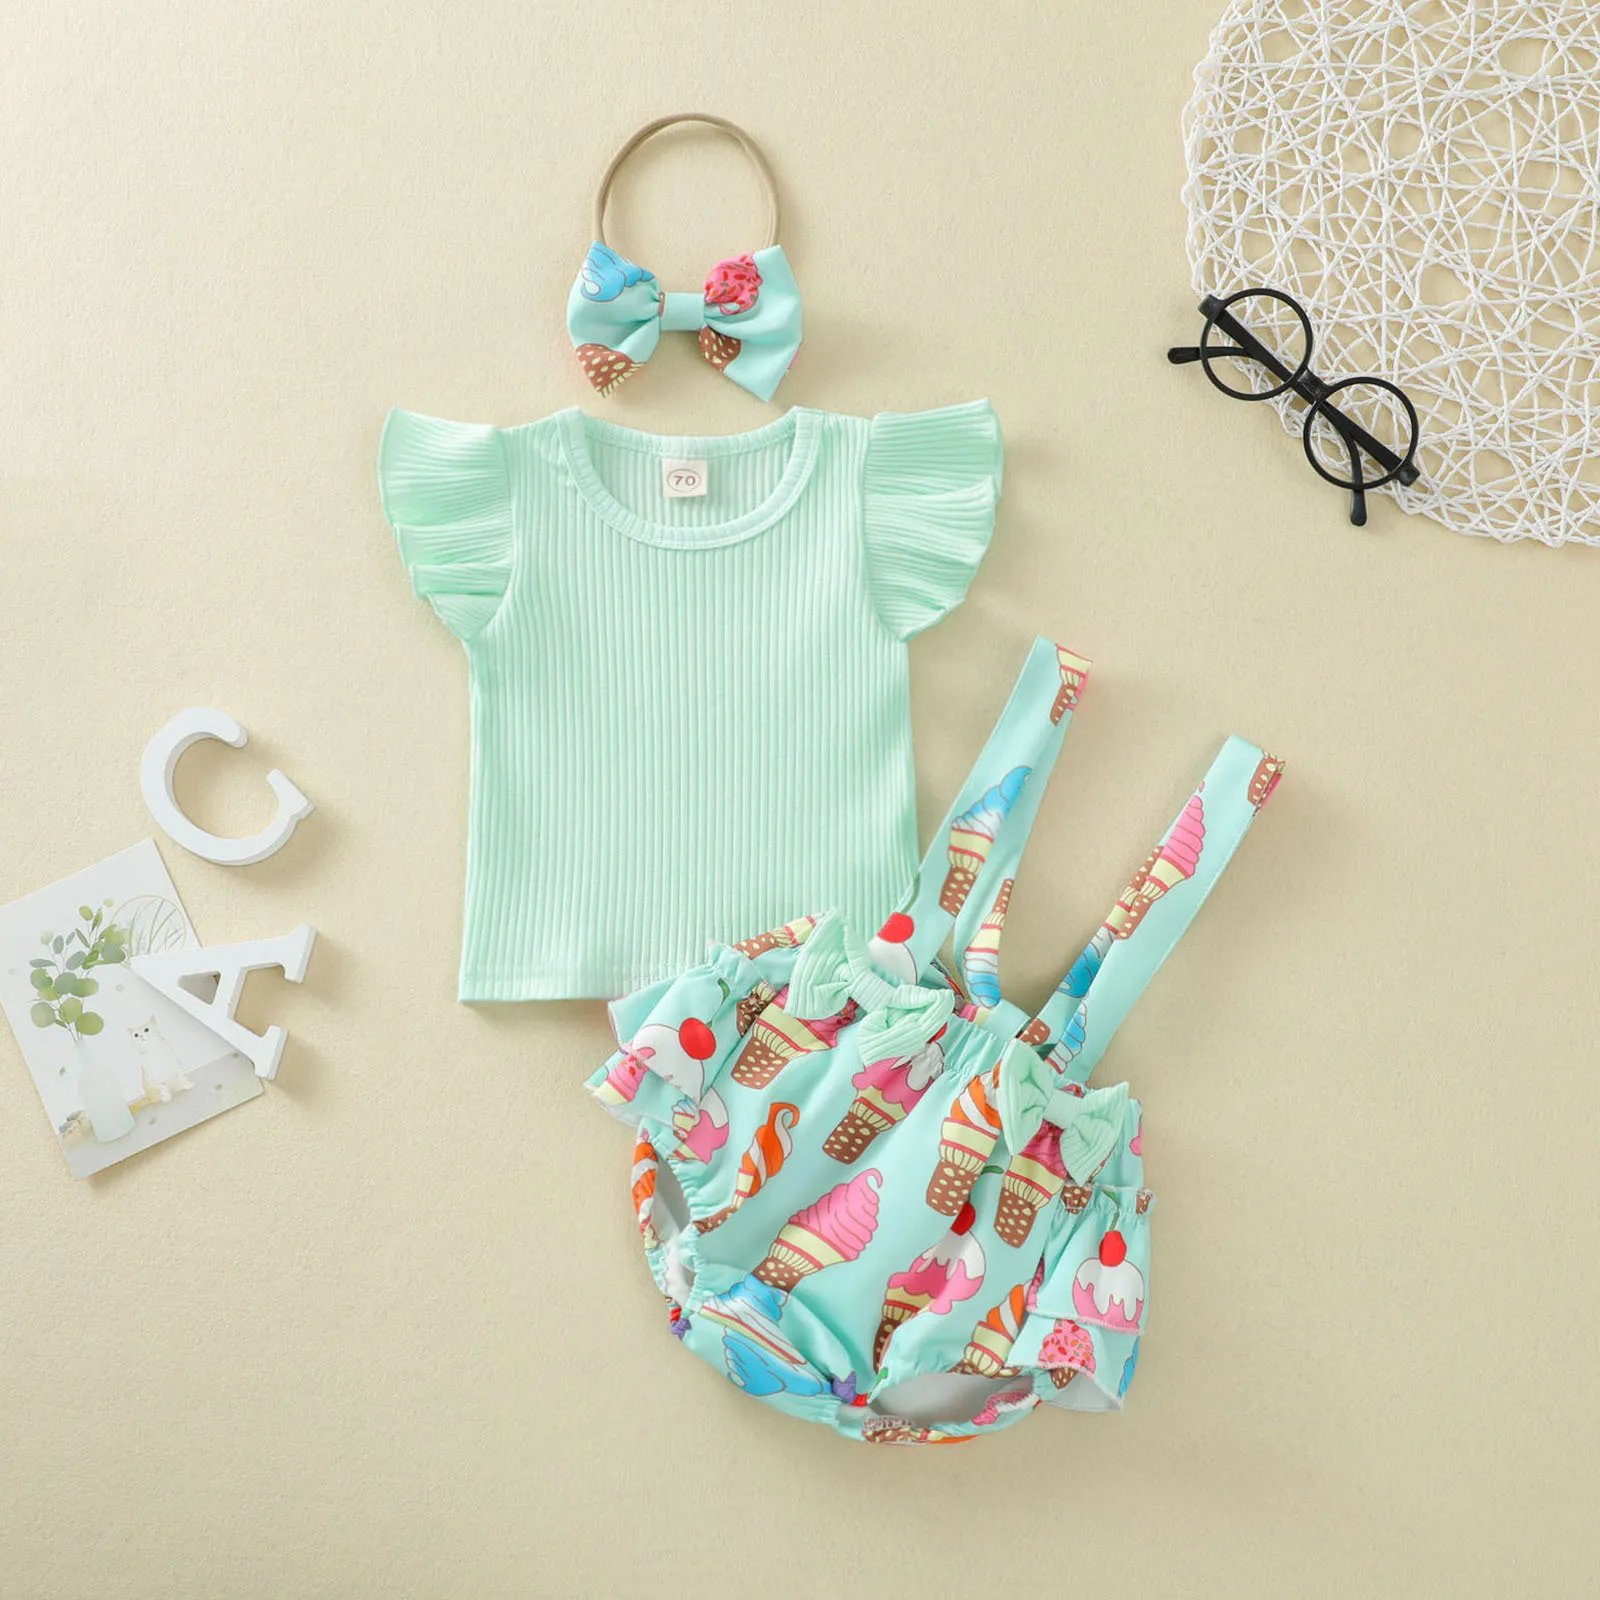 Children's clothing girls clothes set summer baby girl pit strip lace flying sleeve top triangle romper + floral shorts set Baby Clothing Set classic